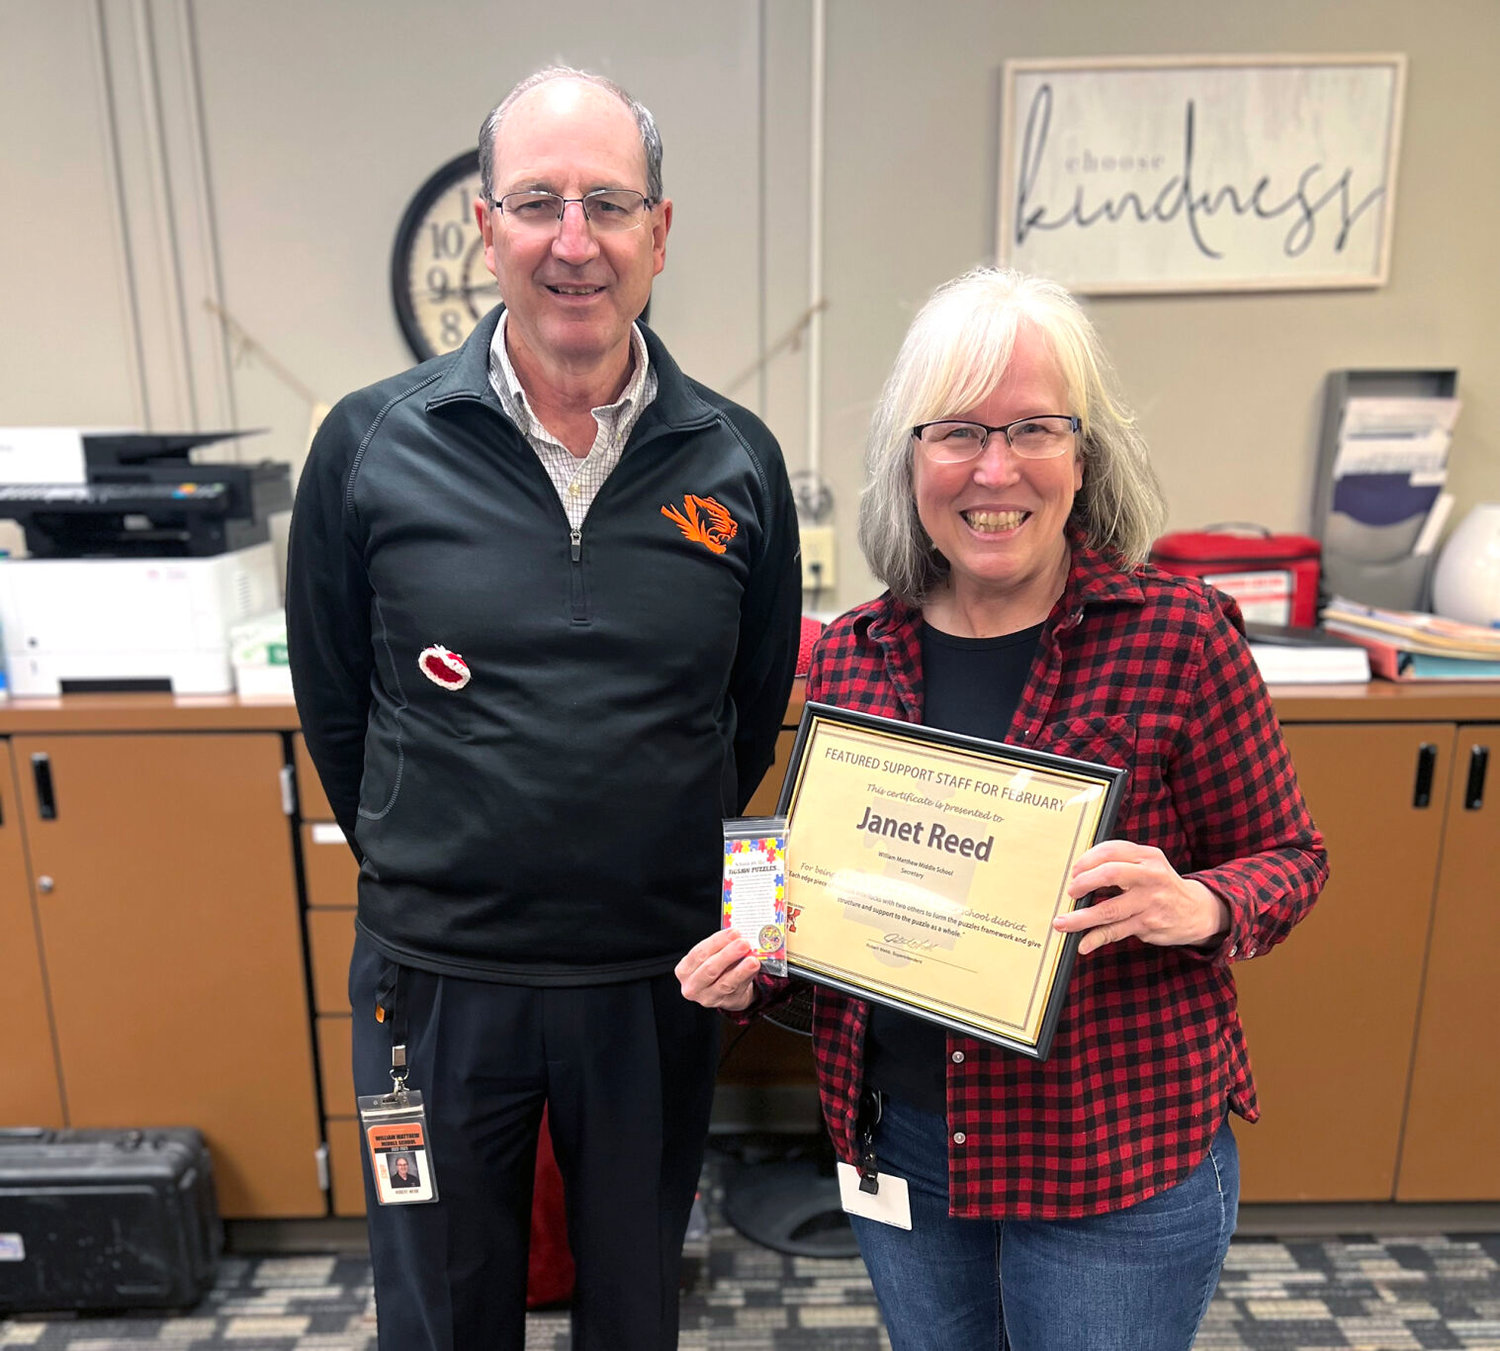 Janet Reed is from Kirksville and has worked for Kirksville R-III for 36 years, nine in the main office of William Matthews Middle School. "Thank you for this recognition," she said. "I love working with our fabulous students and staff at WMMS!"